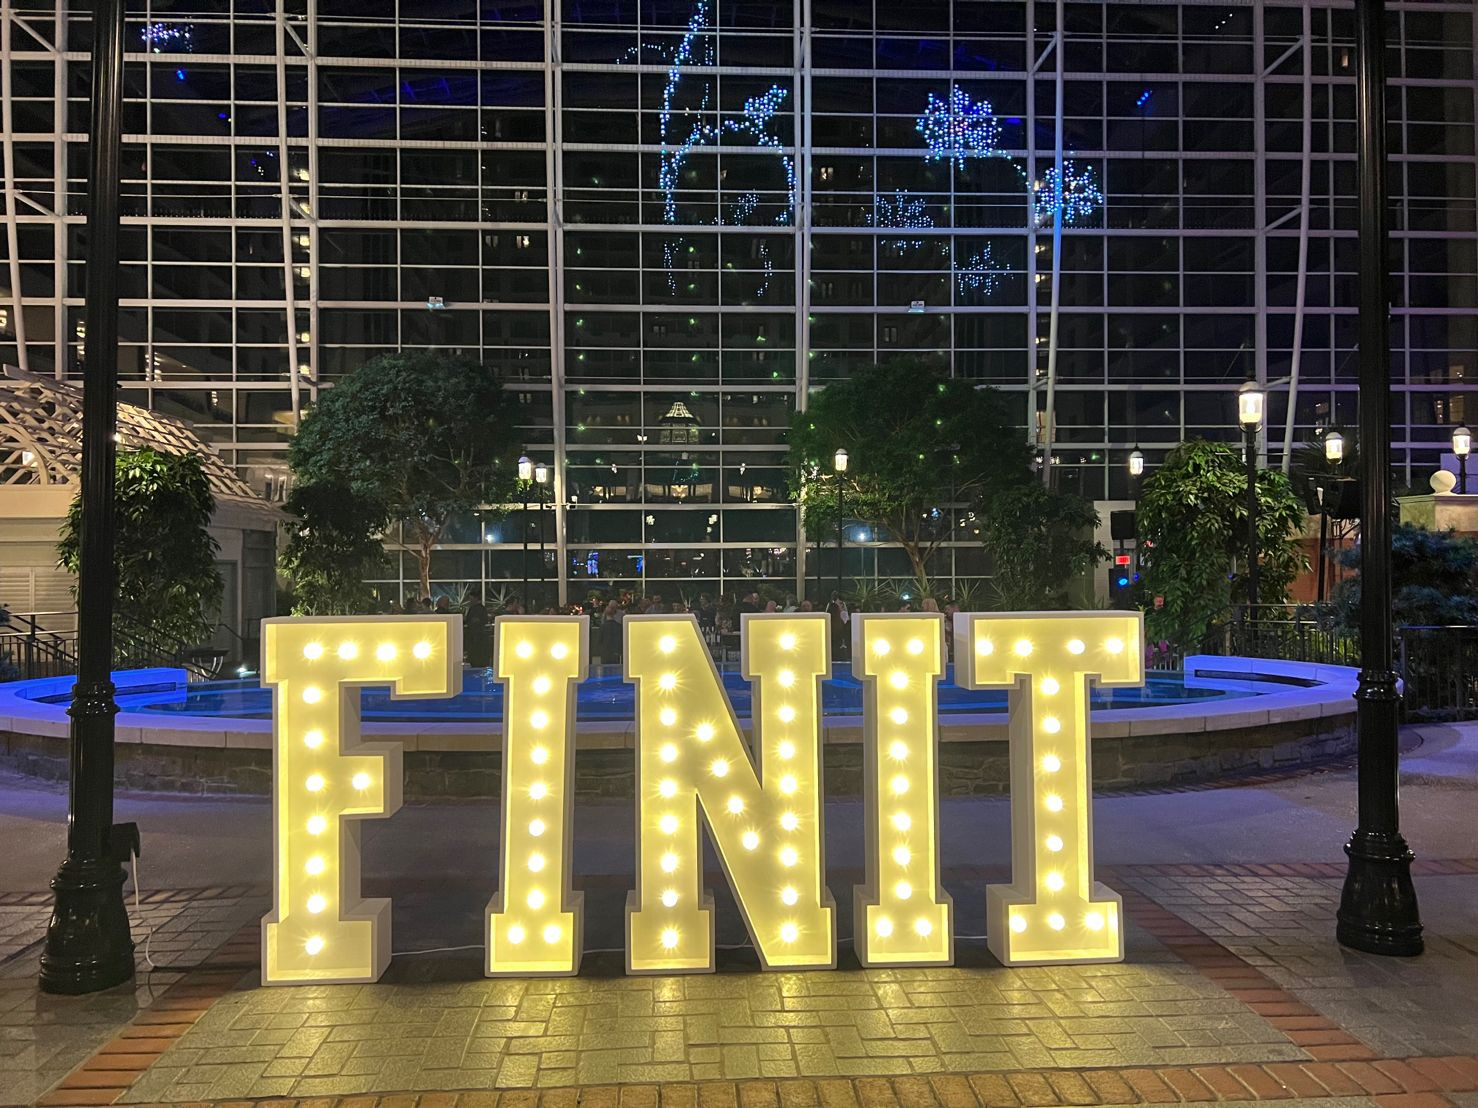 Finitians celebrating at an industry conference in San Antonio, TX. 